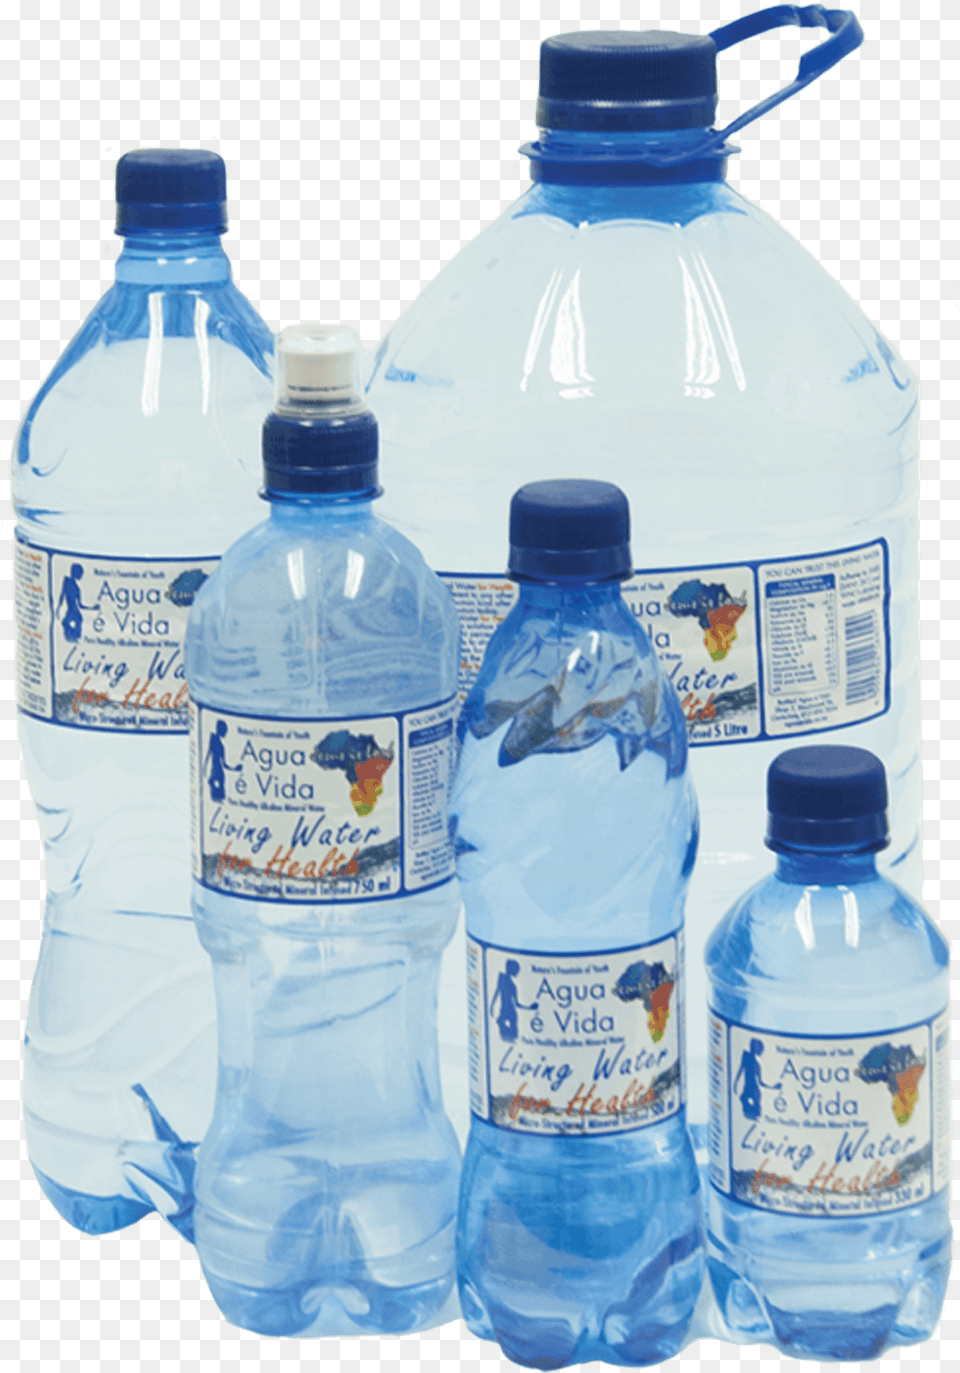 Living Water For Health Mineral Water, Beverage, Bottle, Mineral Water, Water Bottle Png Image